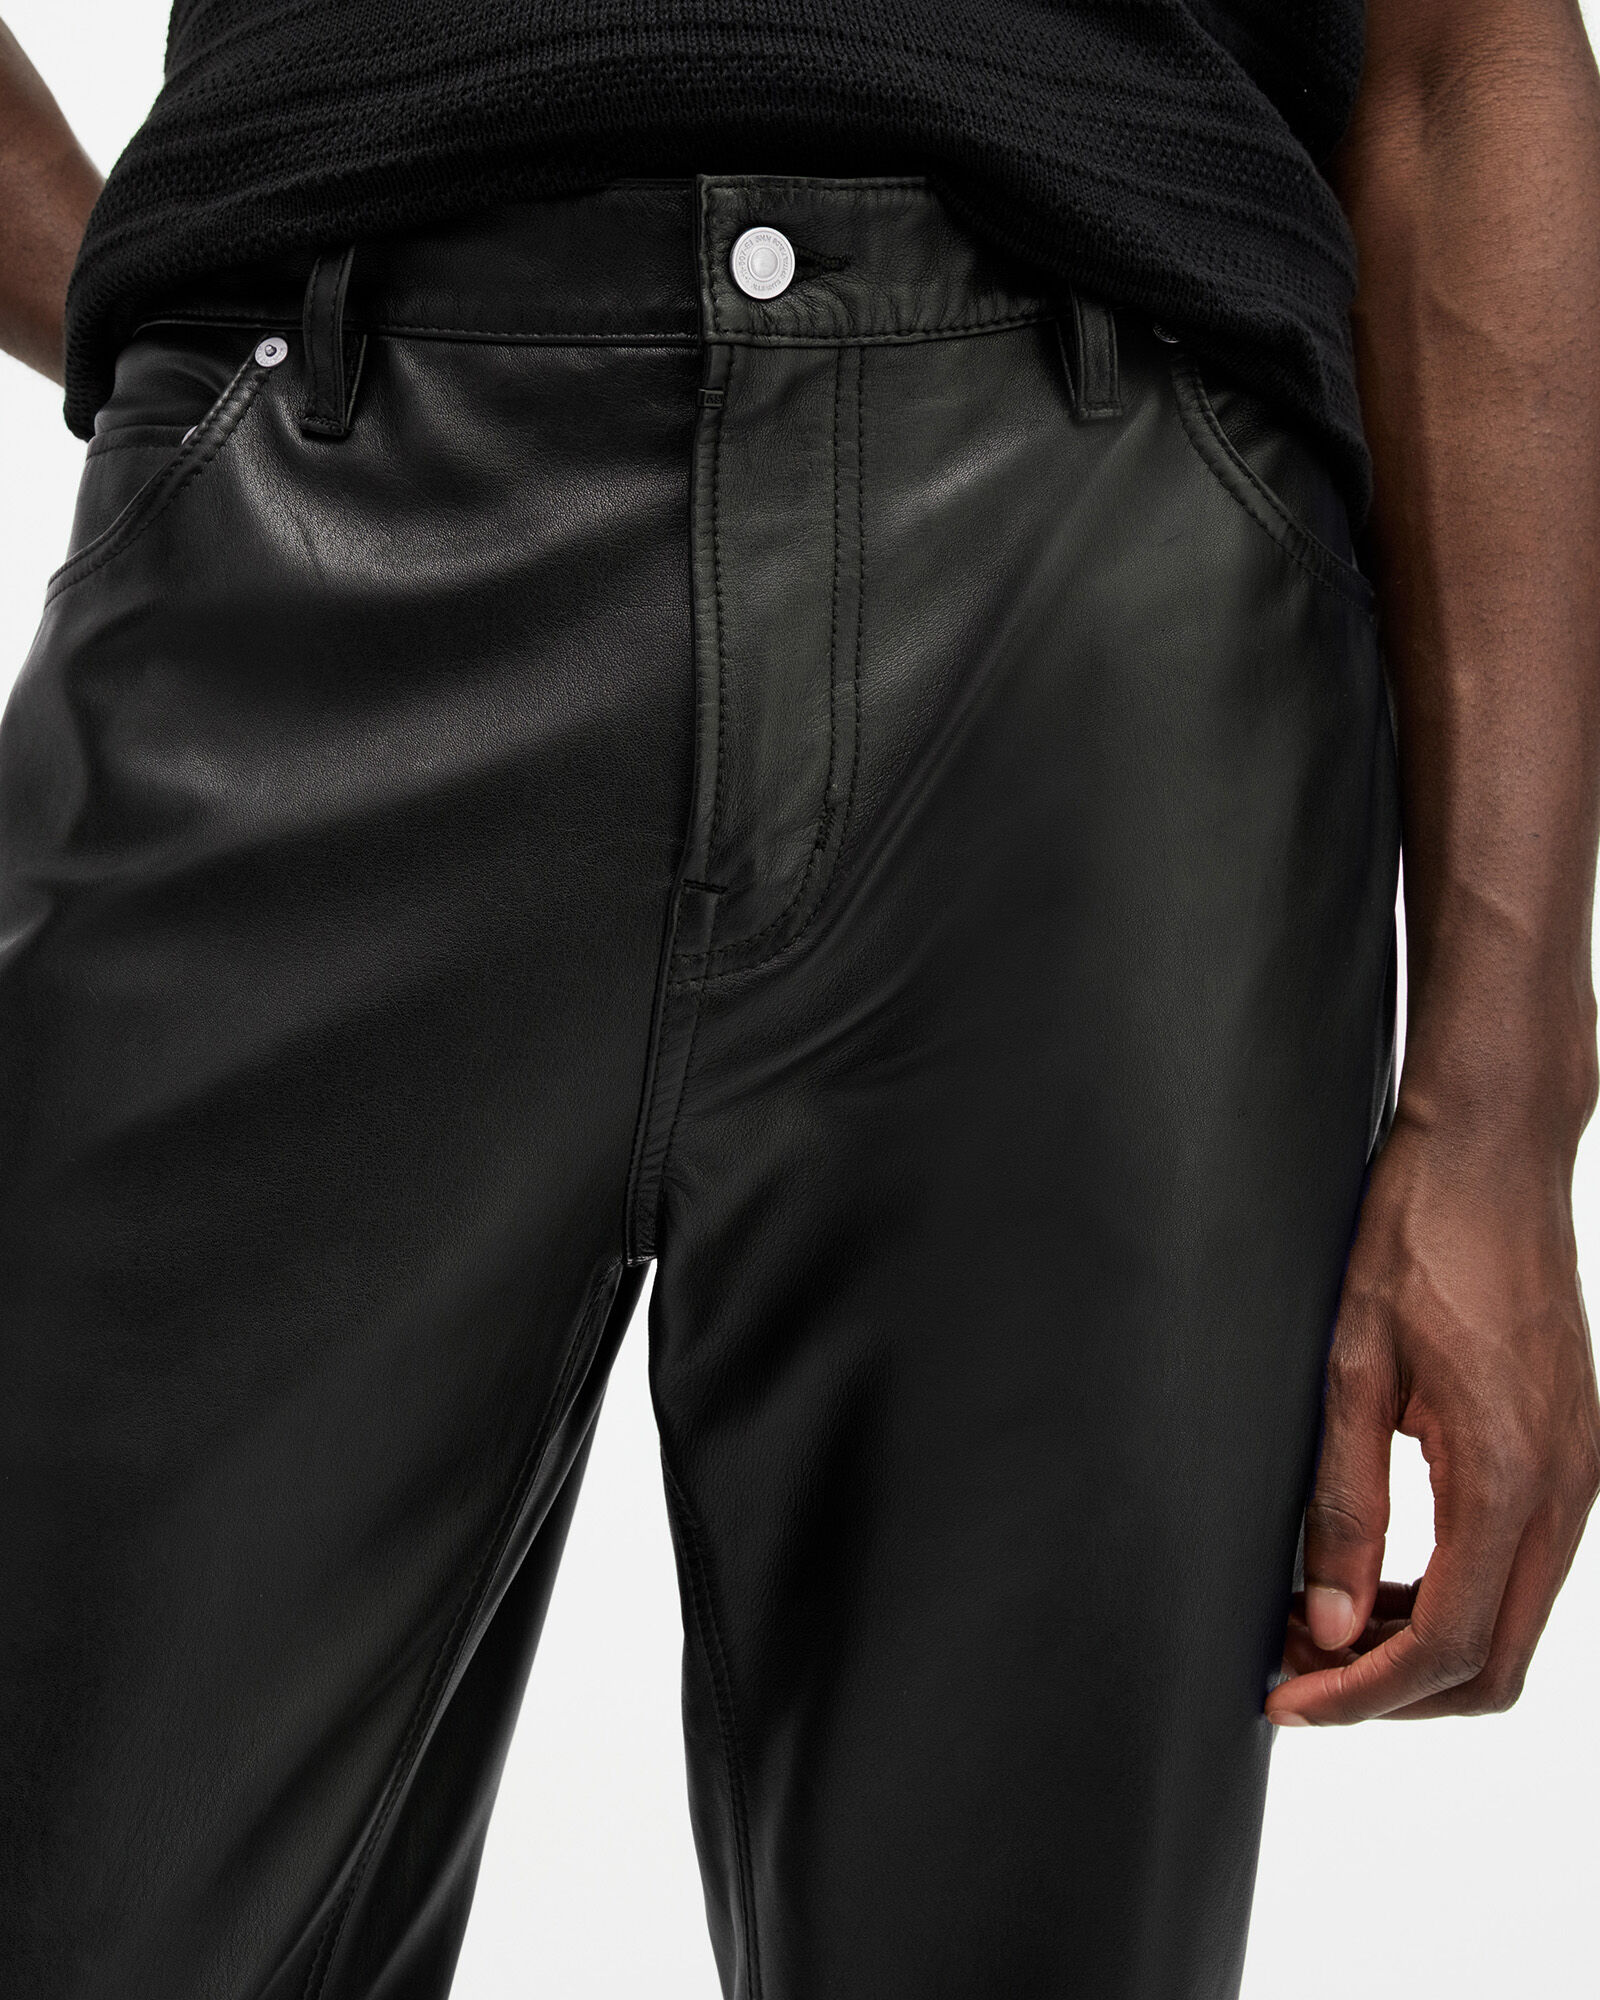 Buy Women's Leather Trousers Online | Next UK